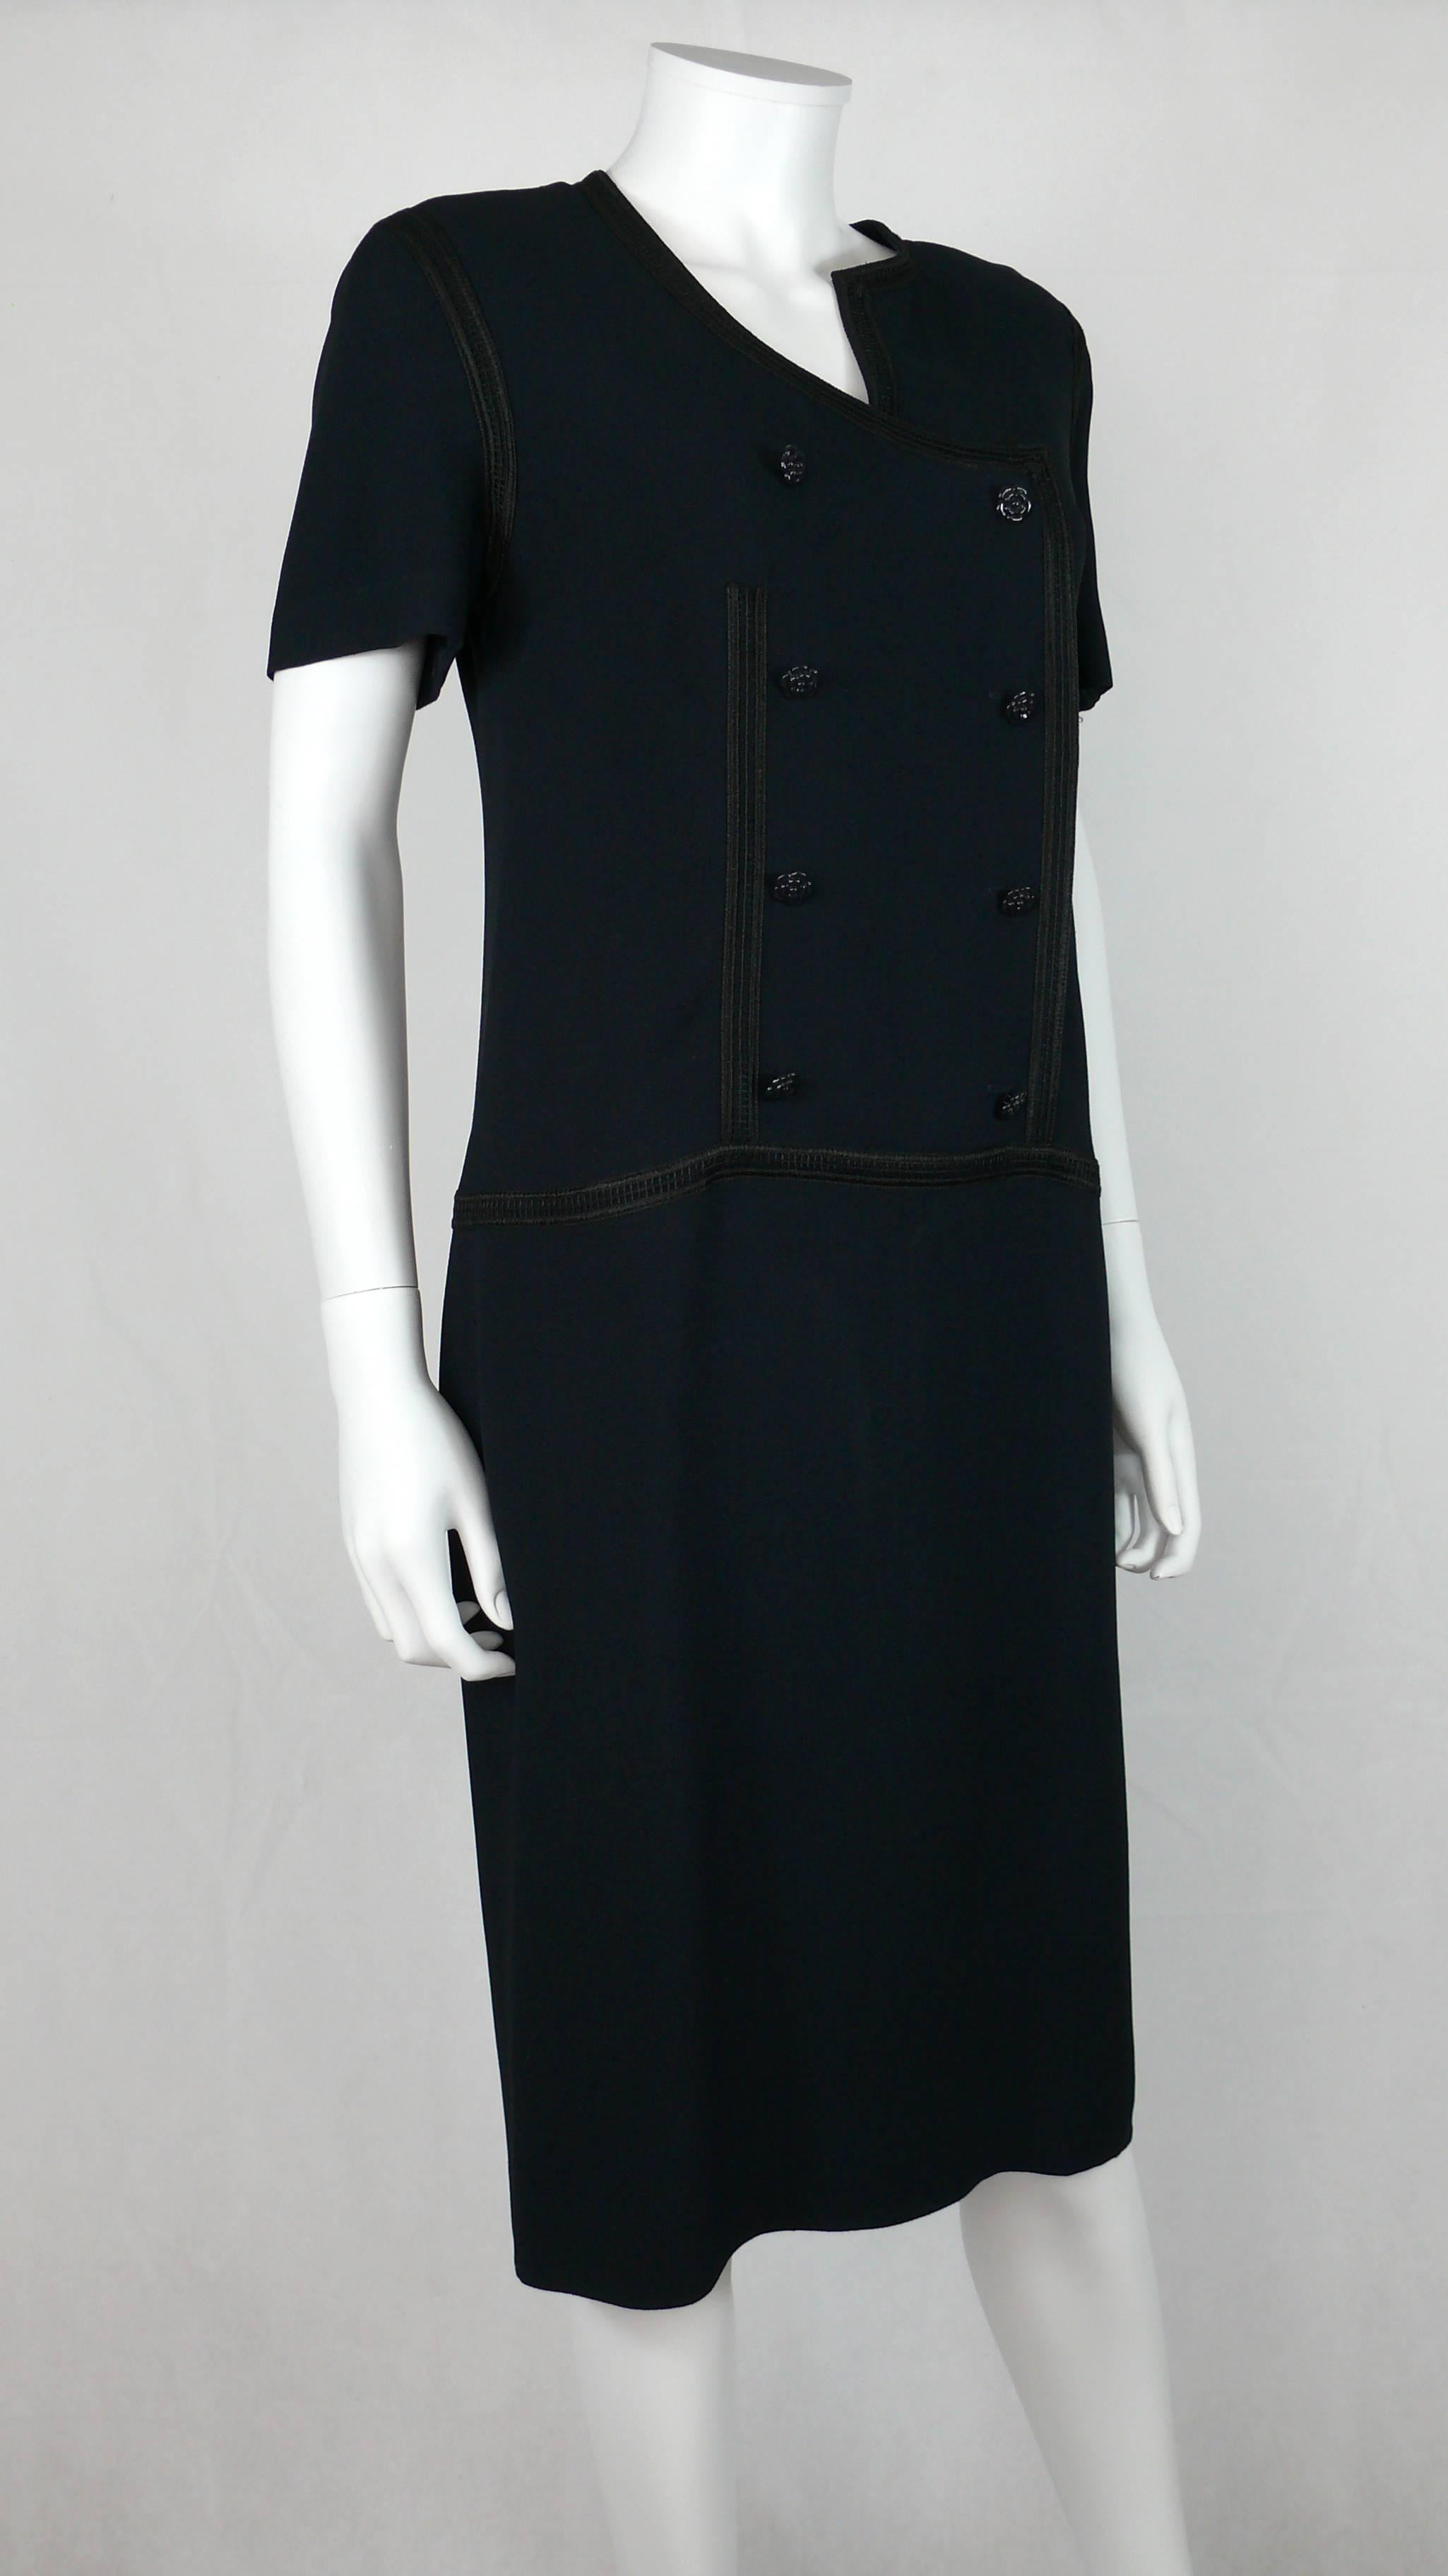 CHANEL 2002 Cruise Collection navy dress featuring an asymmetric collar, braids detail and enameled camelia buttons.

Fully lined.
Shoulder pads.
Back zip closure.

Label reads CHANEL Made in France.

Marked Size : 44.
Please refer to